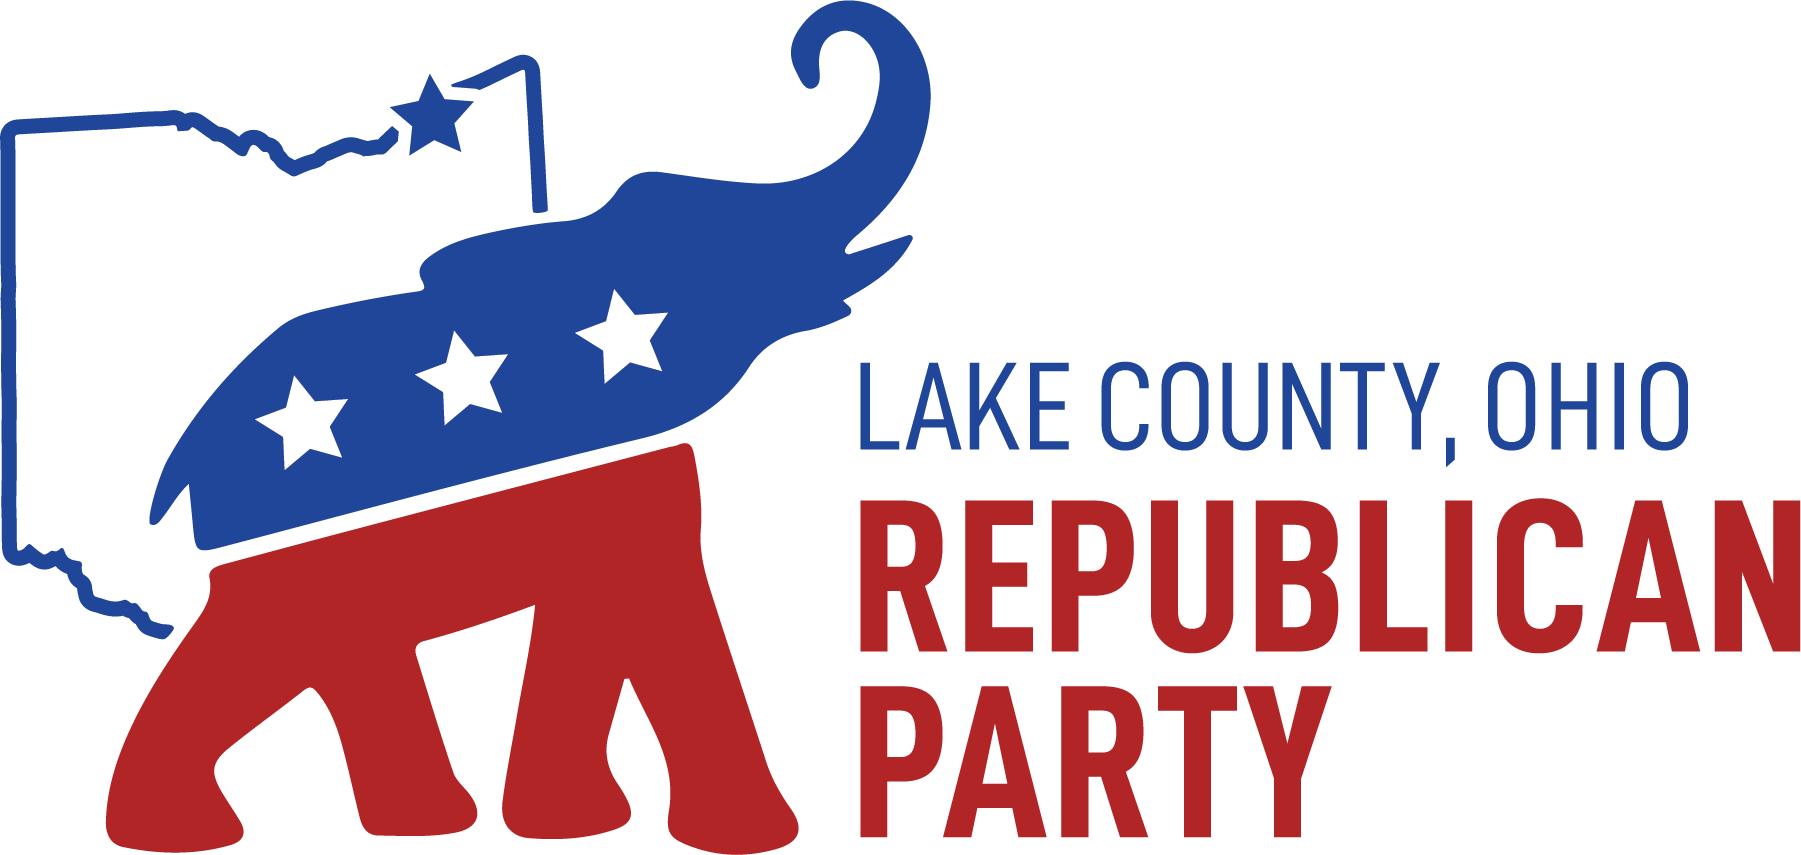 The Lake County, Ohio Republican Party Round Table